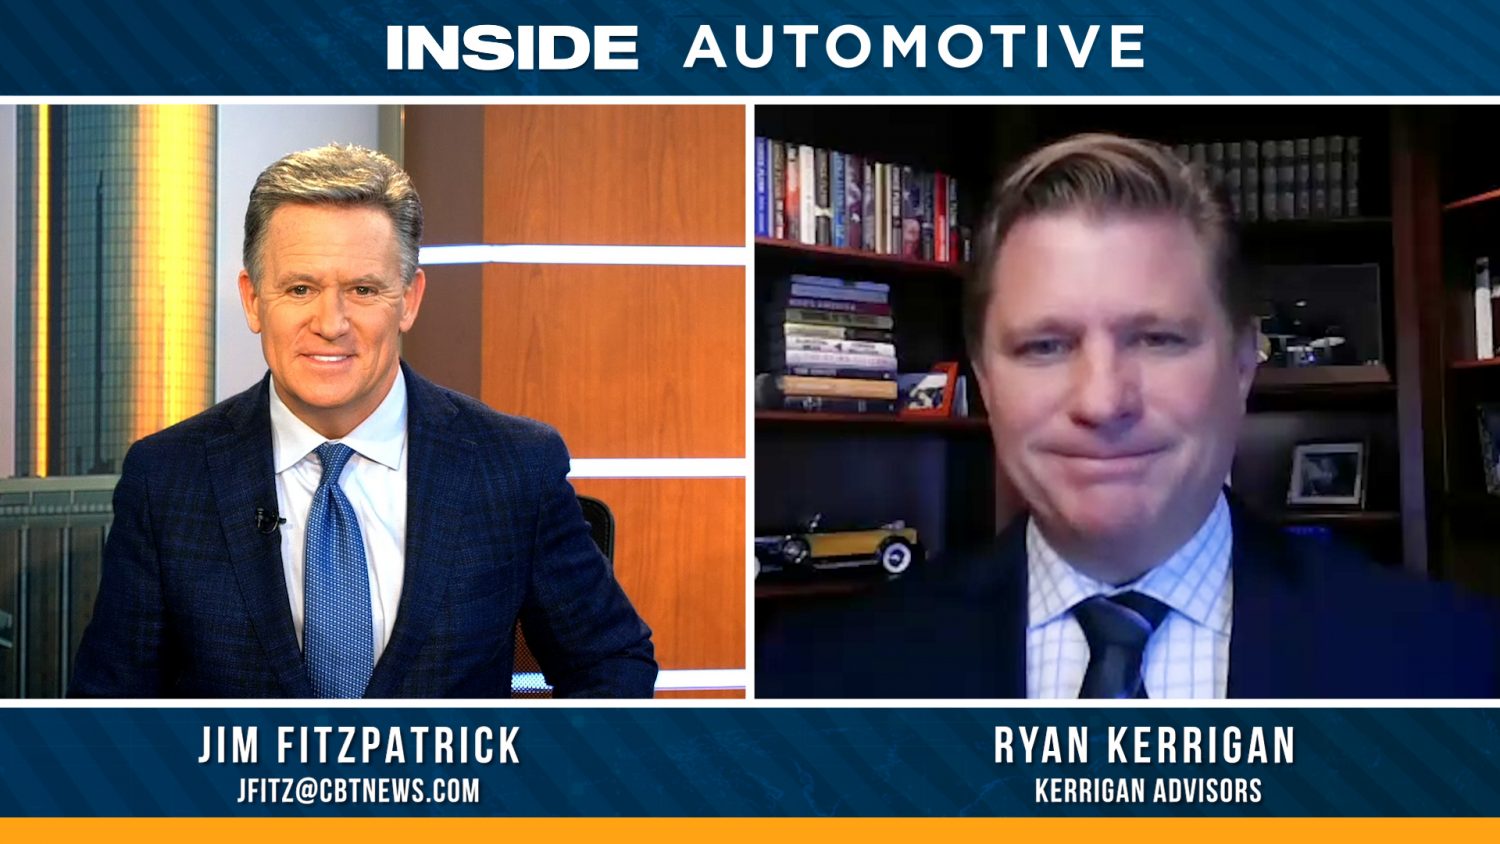 From acquisitions to shifting consumer preferences, today's episode discusses the factors driving M&A activity with Ryan Kerrigan.